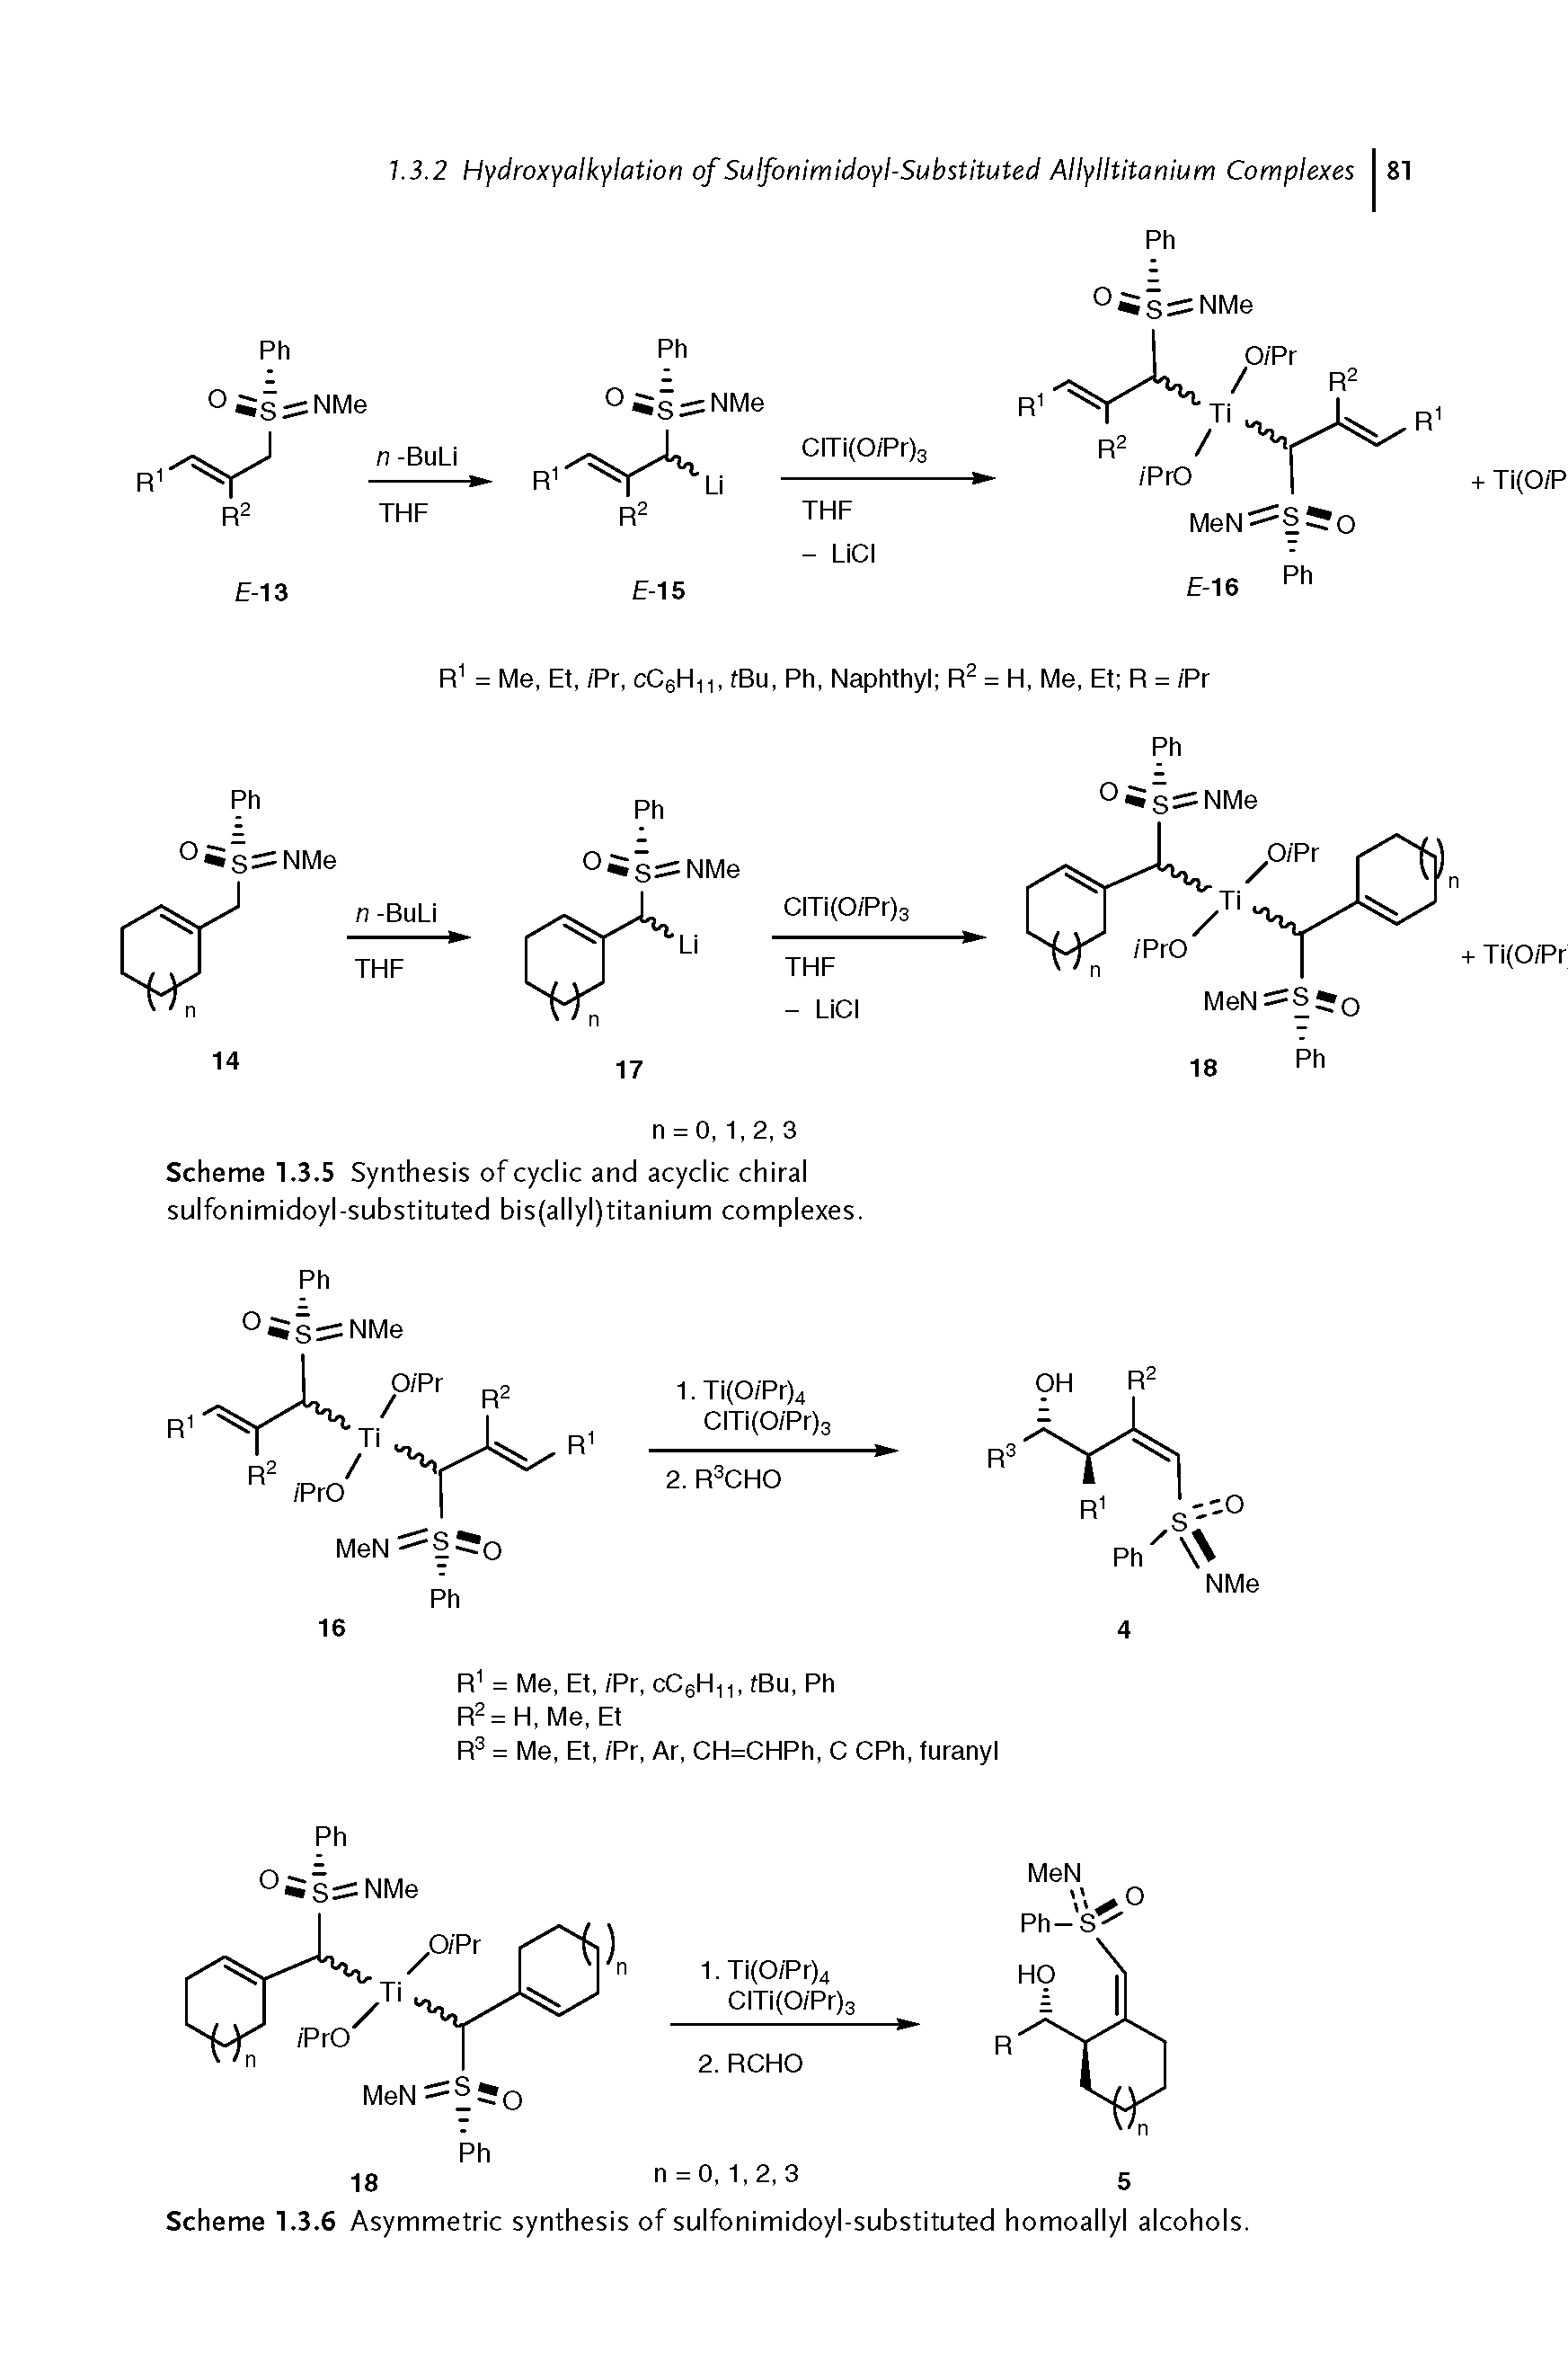 Scheme 1.3.6 Asymmetric synthesis of sulfonimidoyl-substituted homoallyl alcohols.